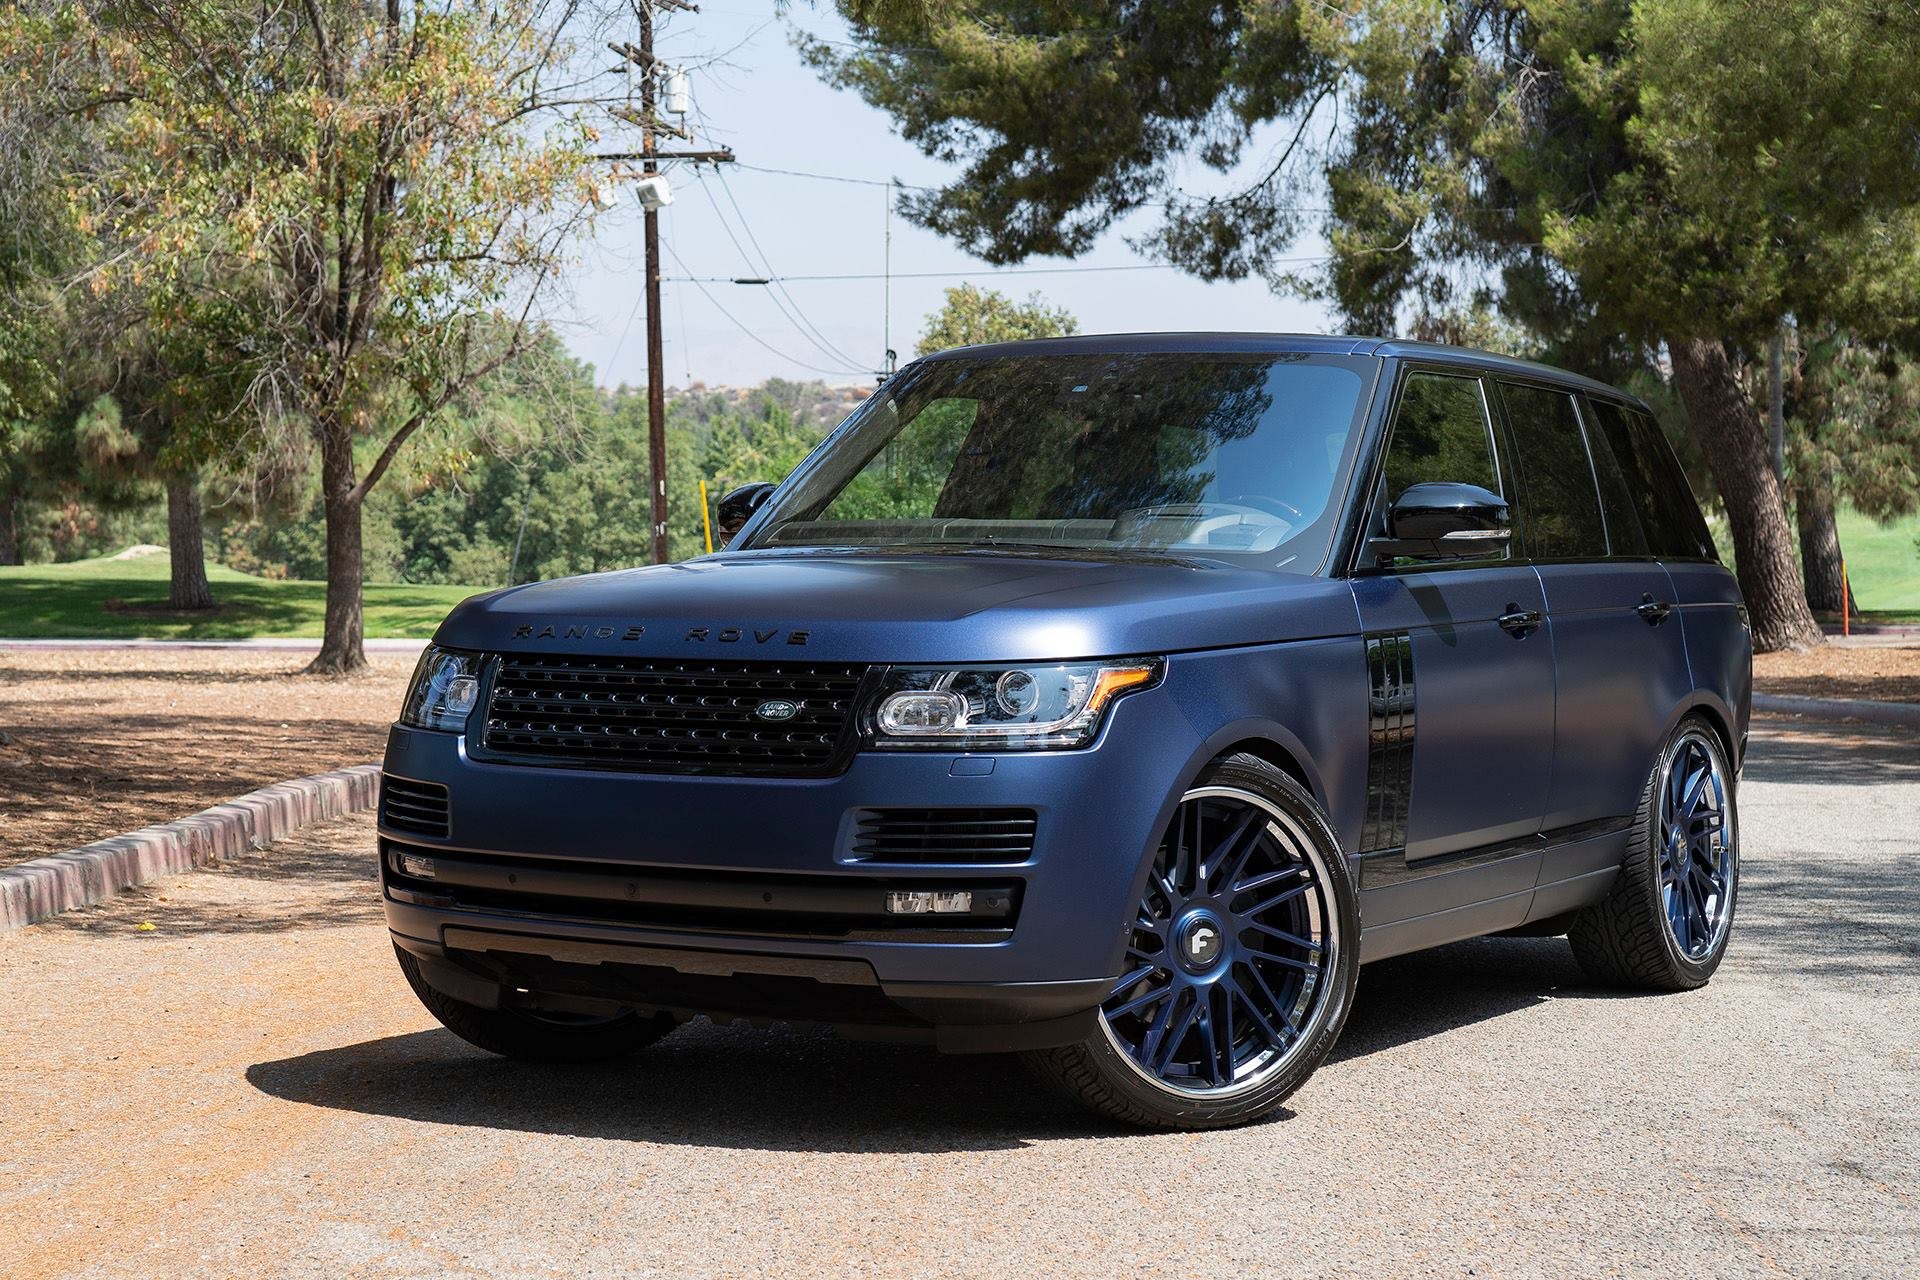 Blue Range Rover with Aftermarket Front Bumper - Photo by Forgiato